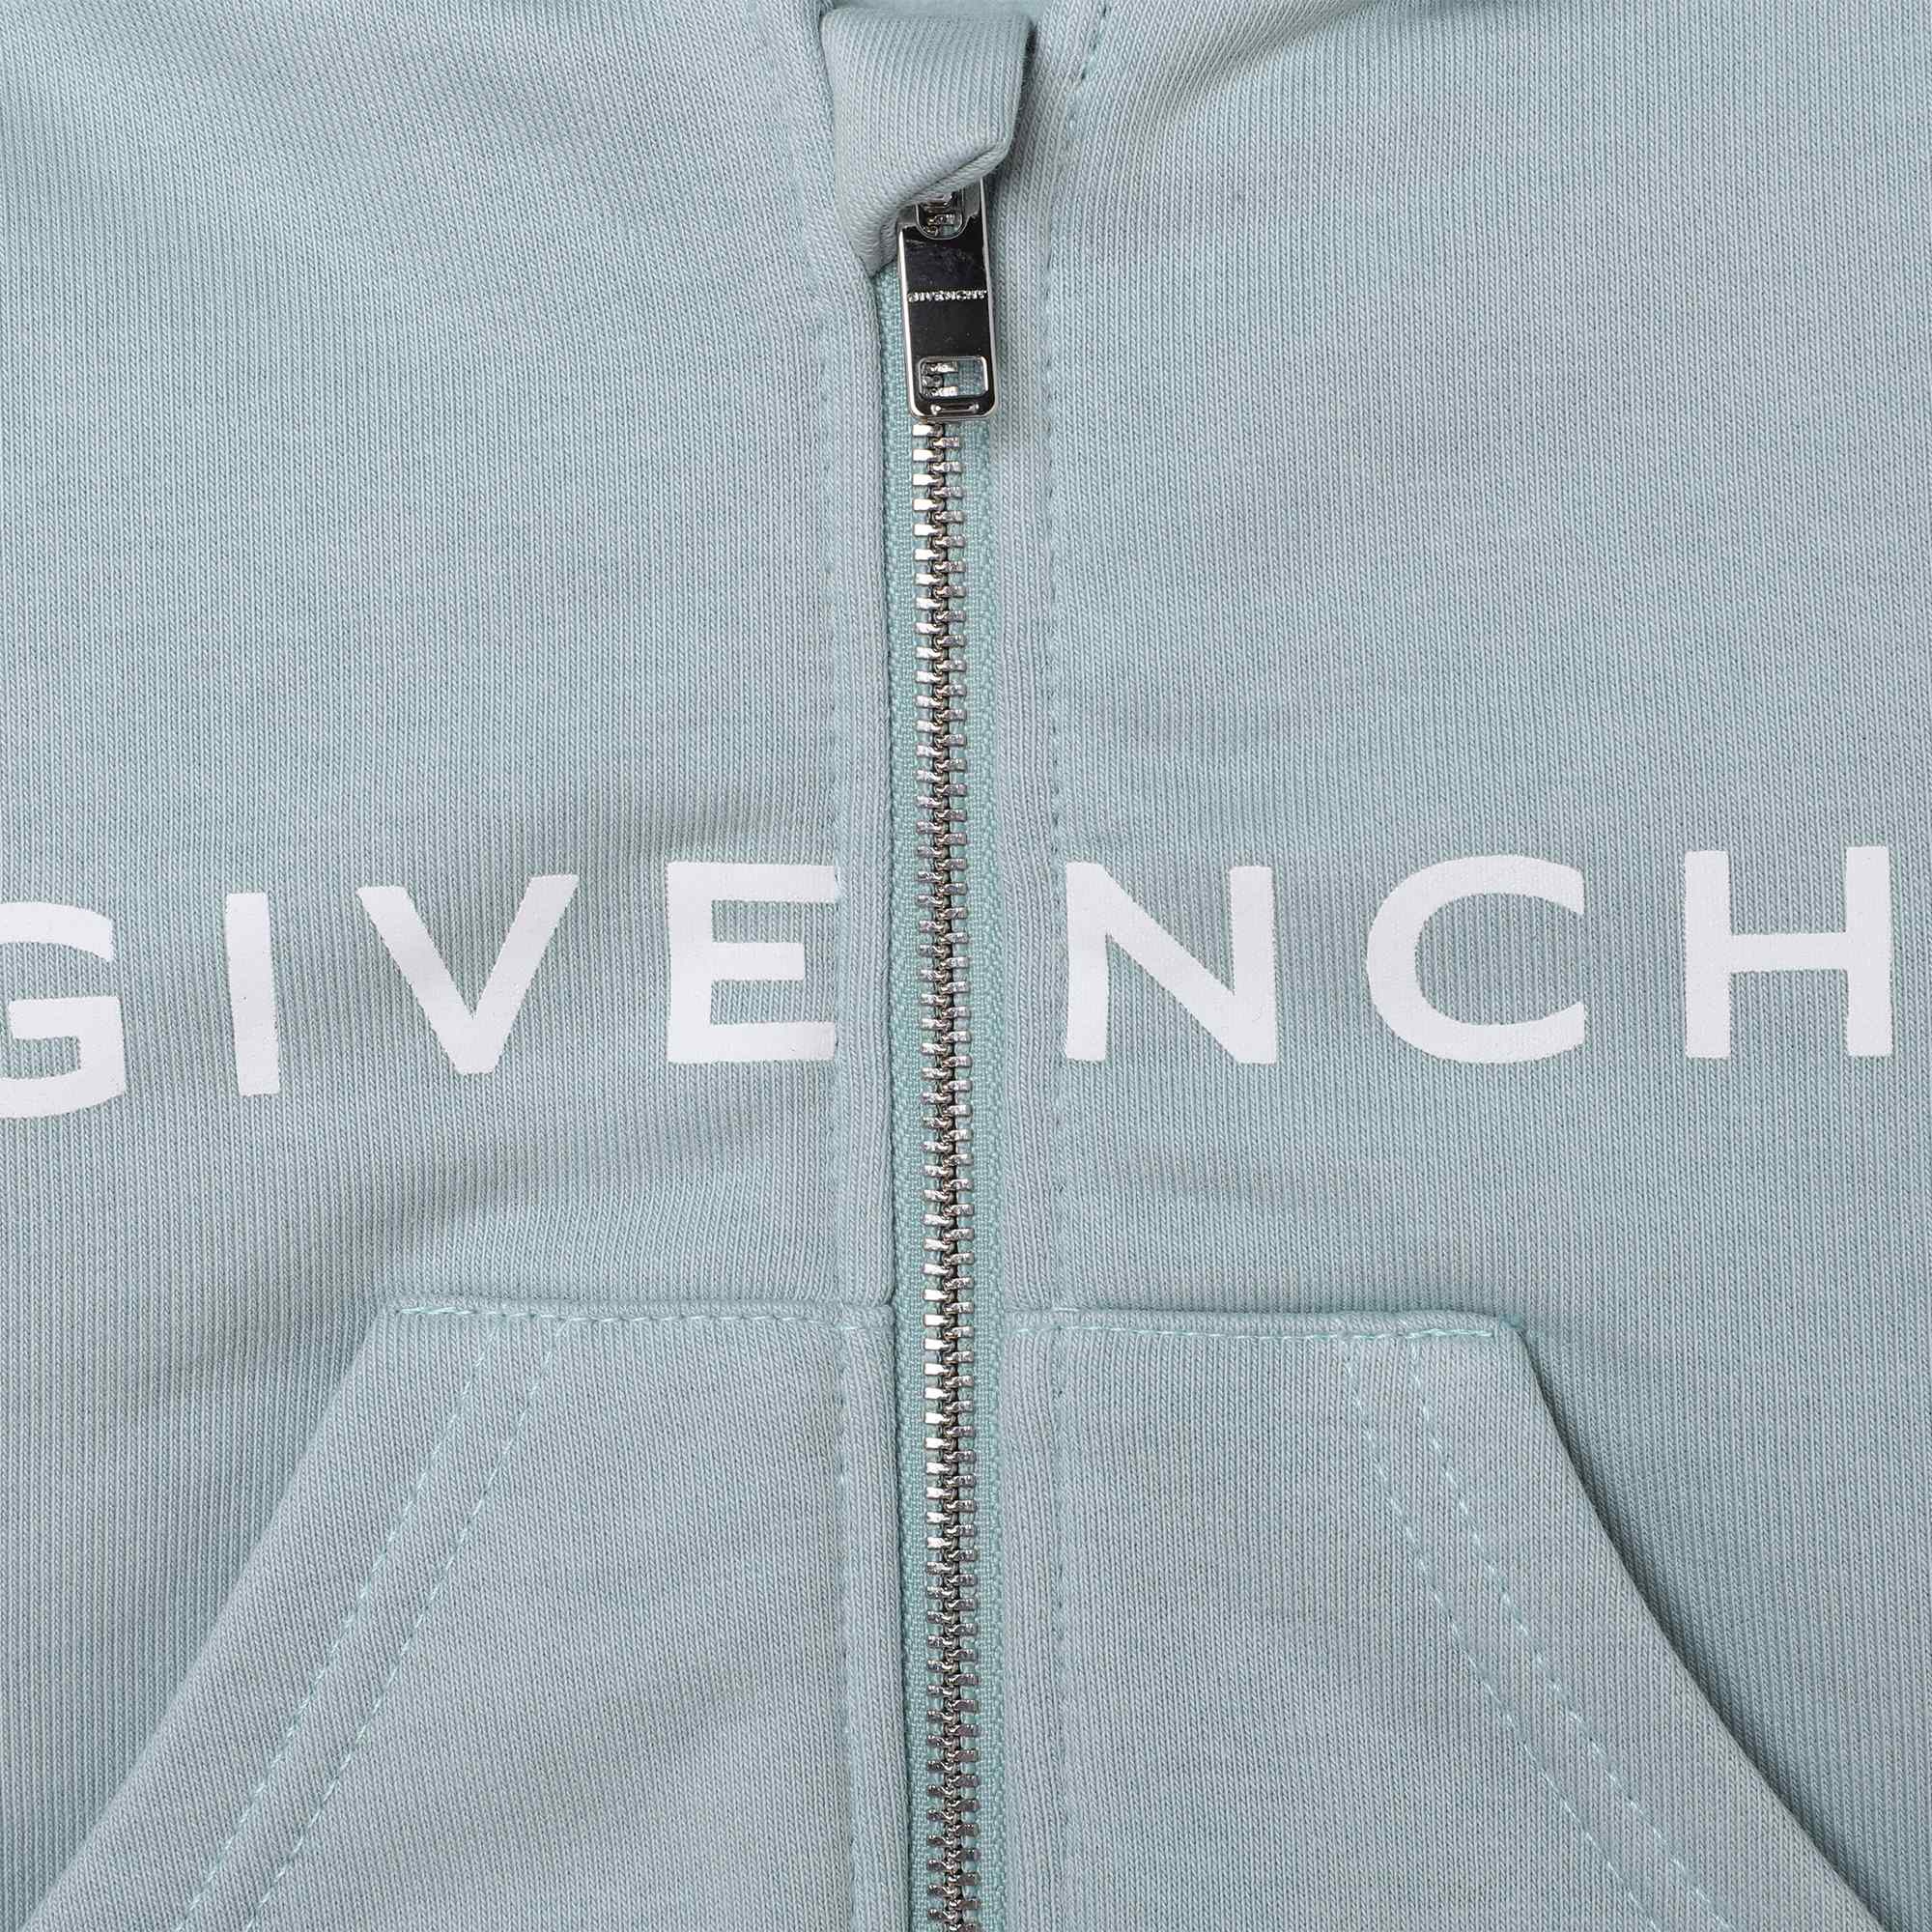 Givenchy Baby Boys Logo Hoodie in Light Blue